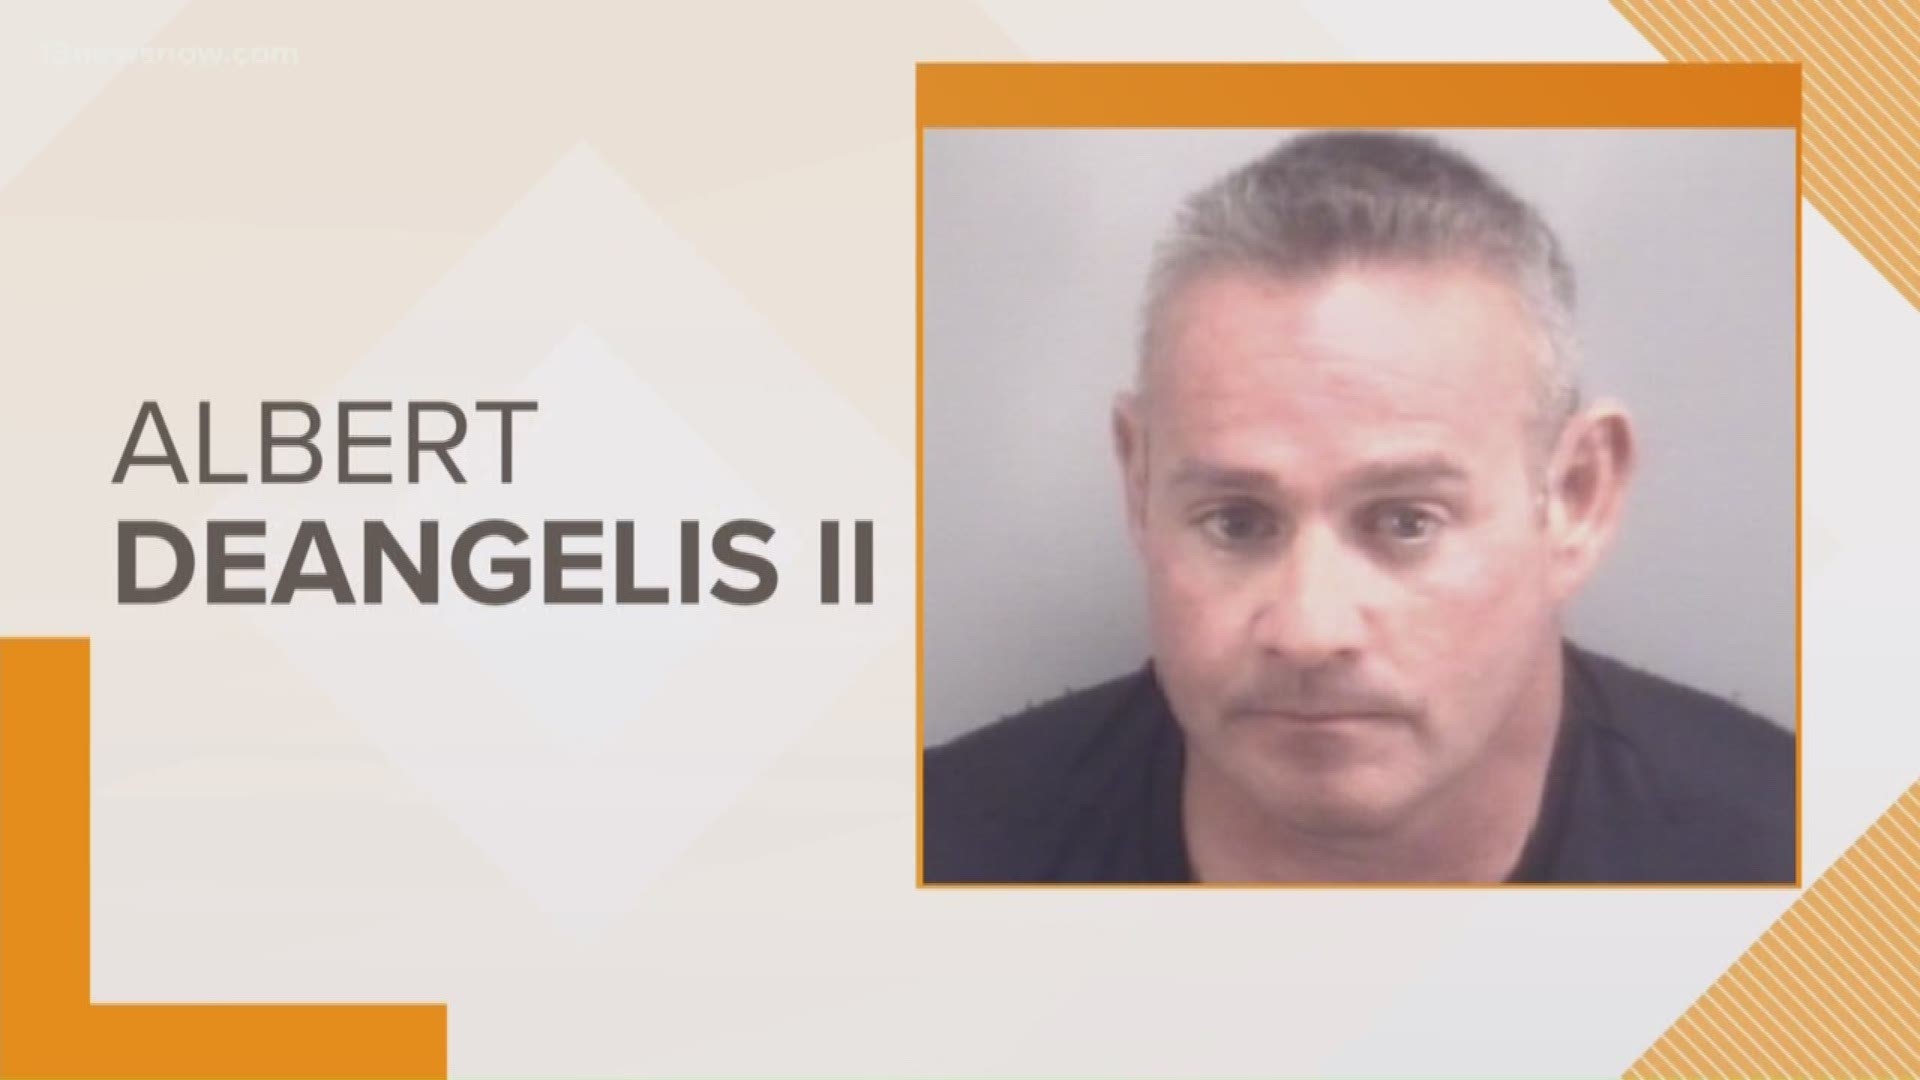 Master Police Officer Albert Joseph DeAngelis II, 48, was arrested Wednesday and charged with one count of domestic assault.